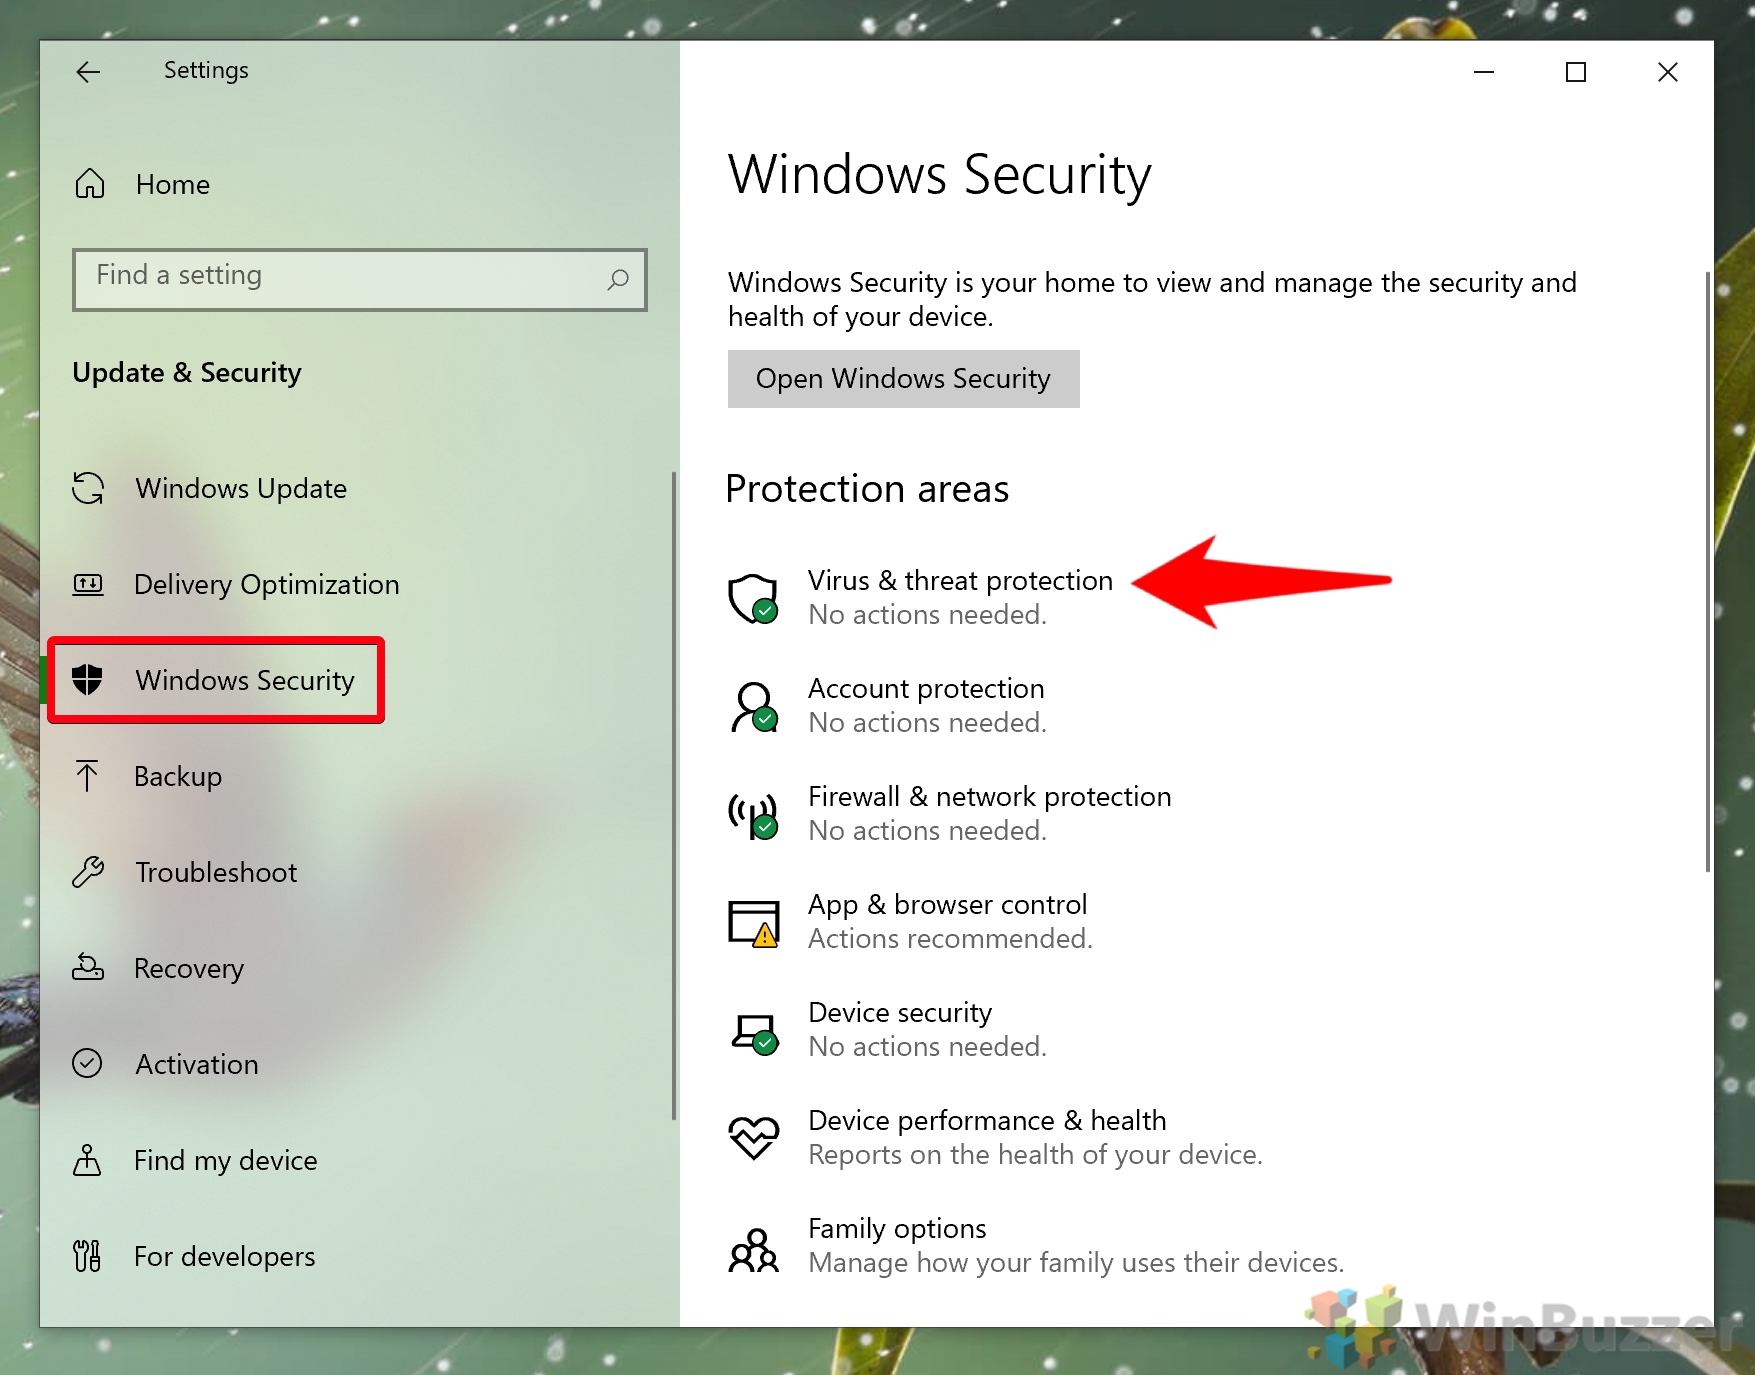 Windows 10 - Settings - Update & Security - Windows Security - Open Virus & Threat Protection